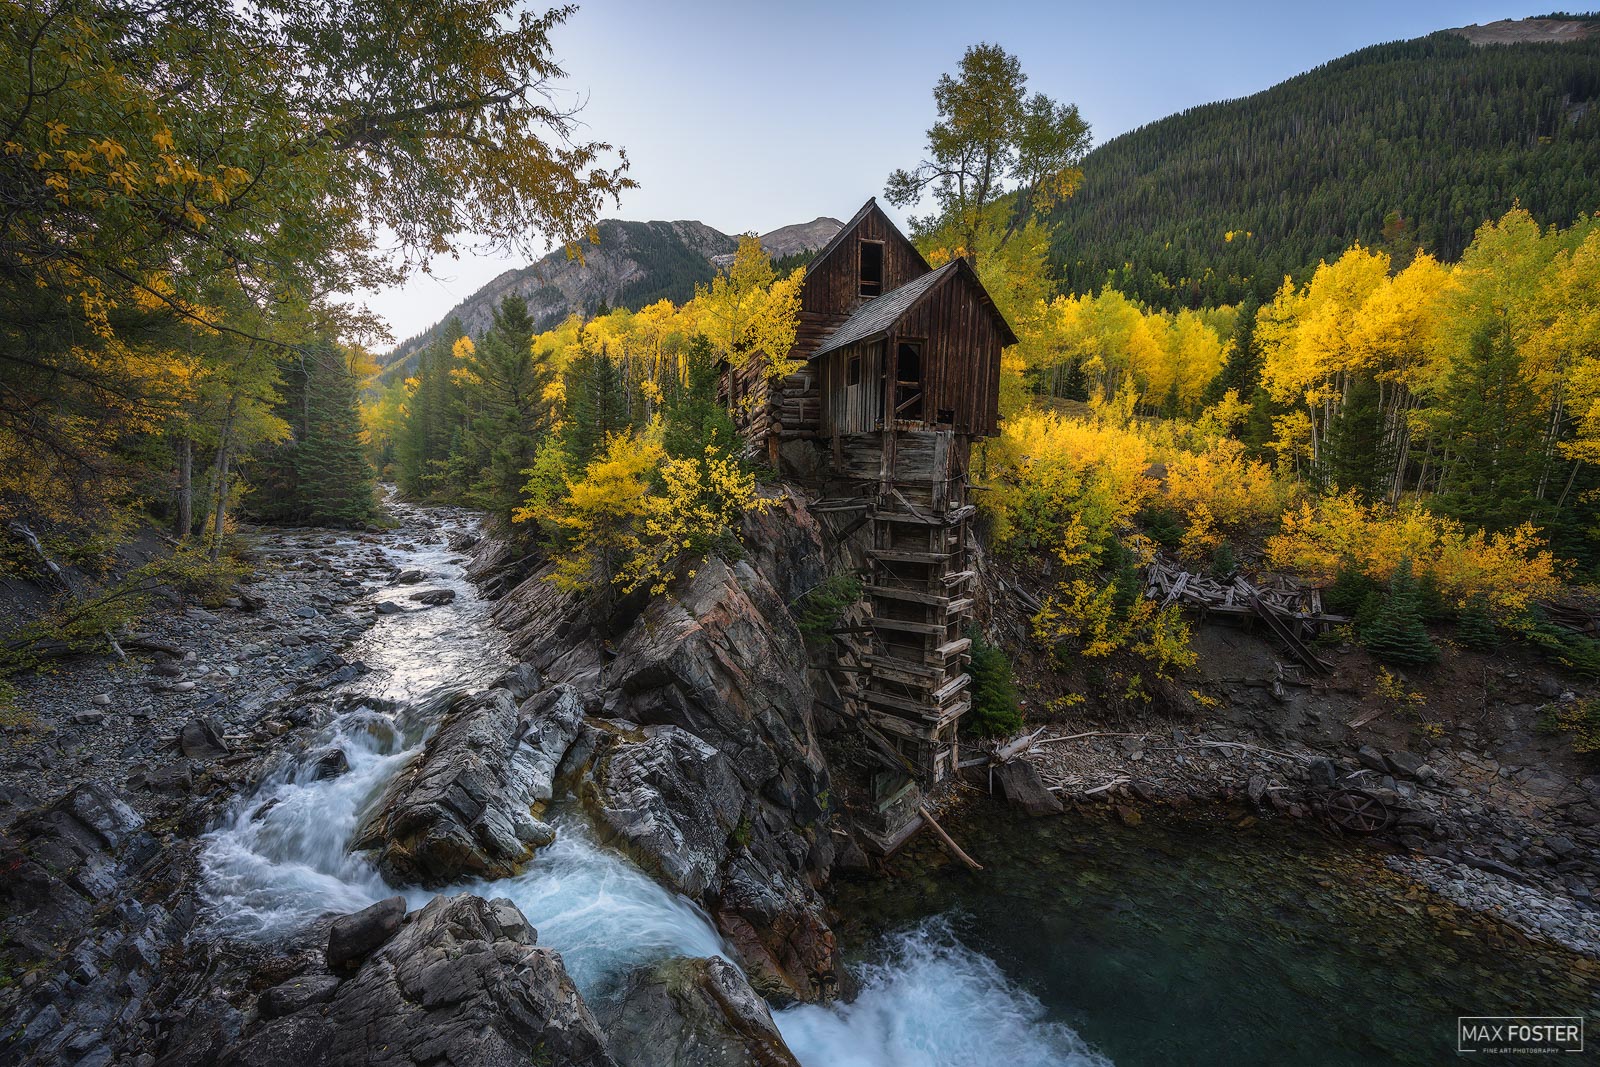 Refresh your space with A Bygone Era, Max Foster's limited edition photography print of the Old Crystal Mill on the Crystal River...